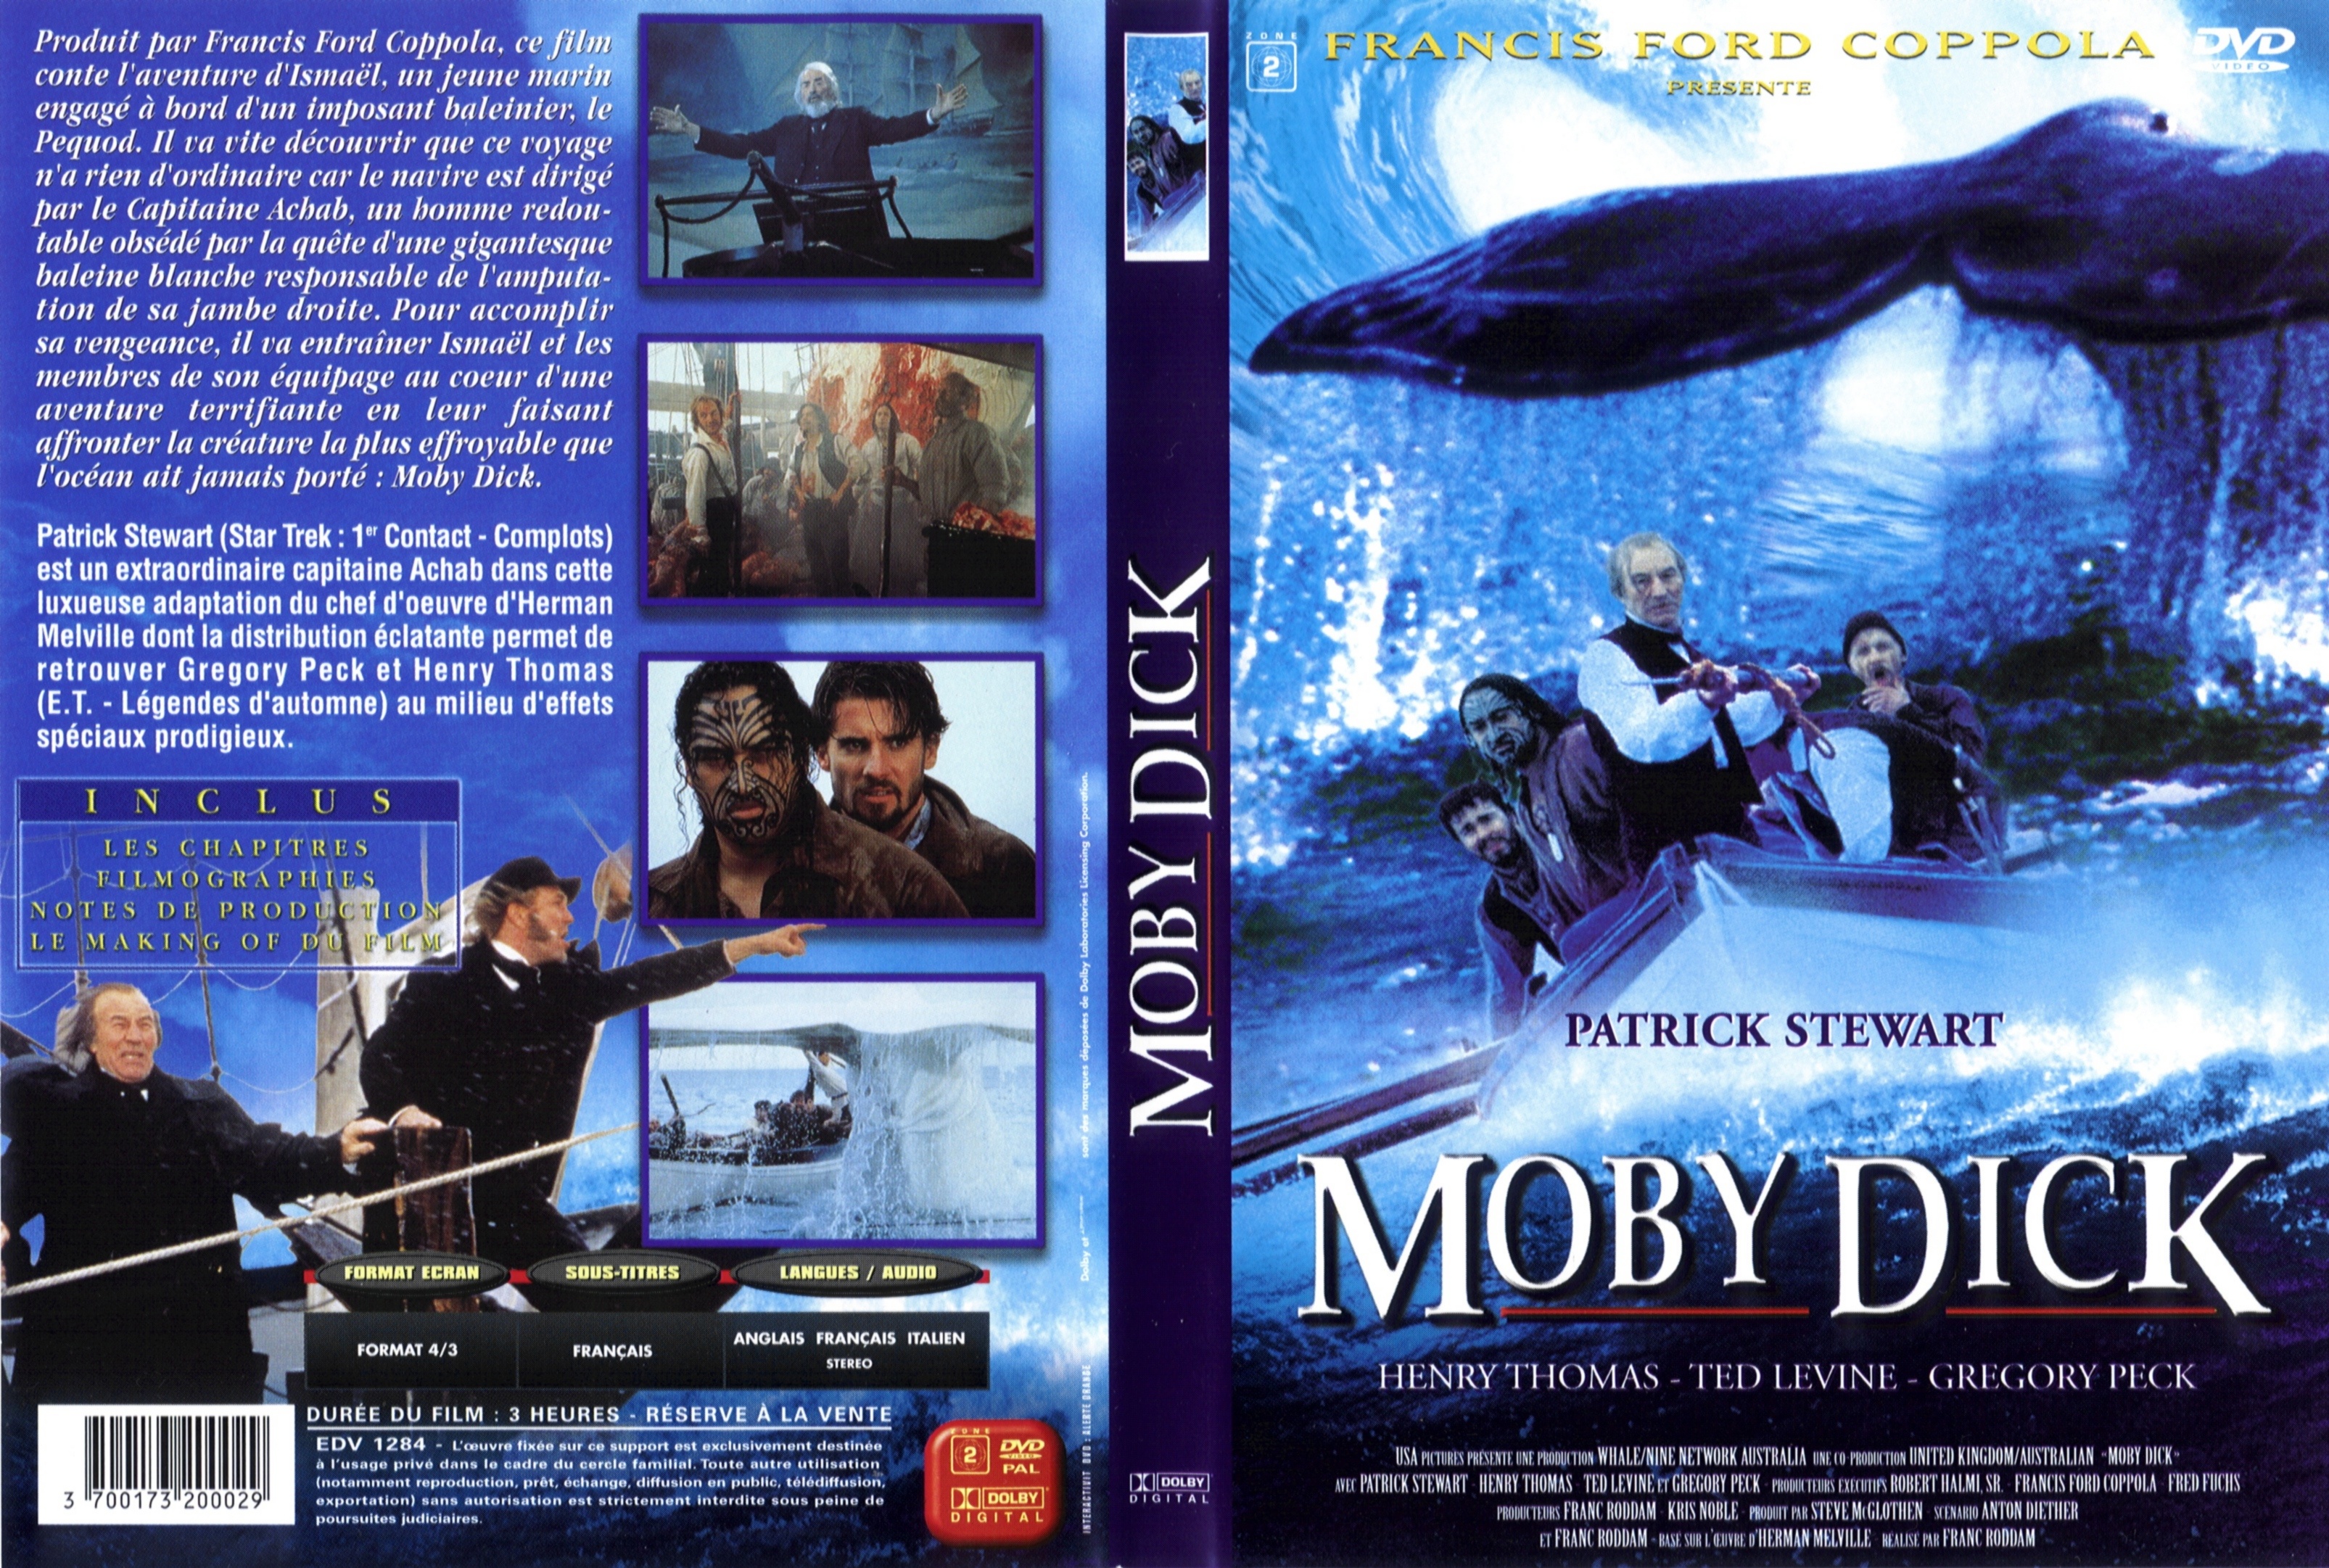 Jaquette DVD Moby Dick (1998)